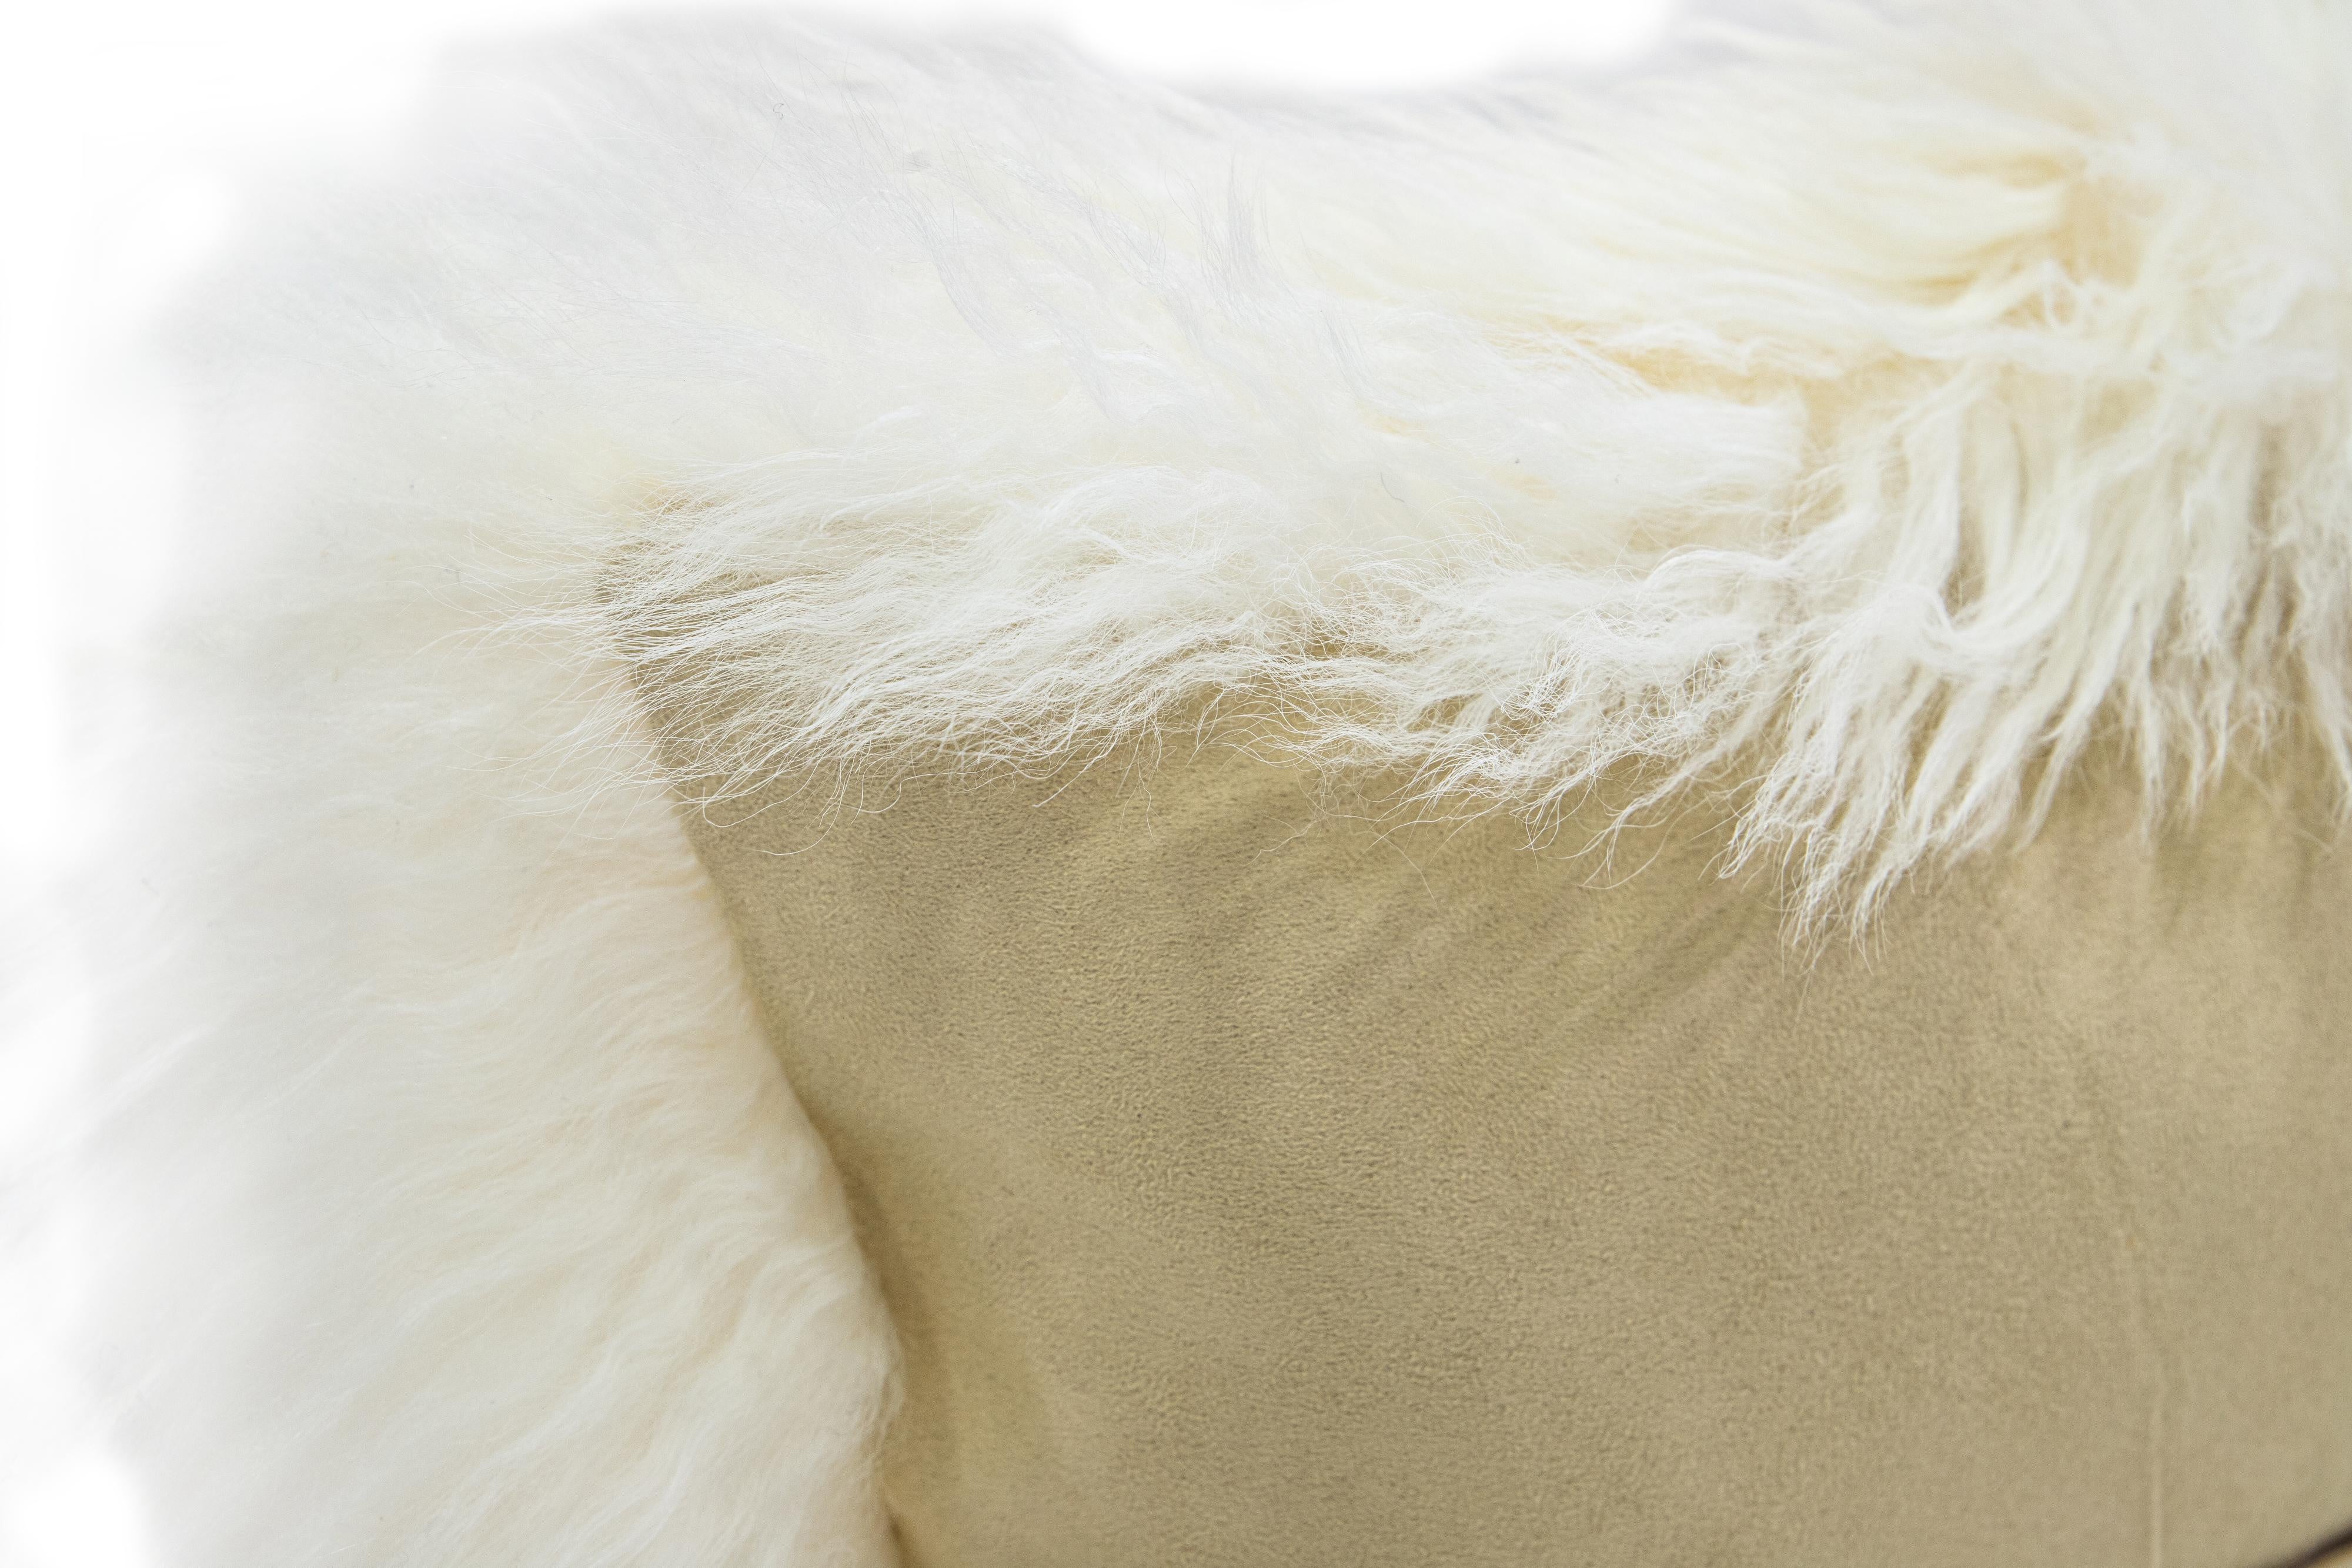 Enhance your home decor with the Modern Mongolian Lamb Fur Single Side Pillow. Designed with meticulous care and crafted from luxurious materials, this hand-made 12